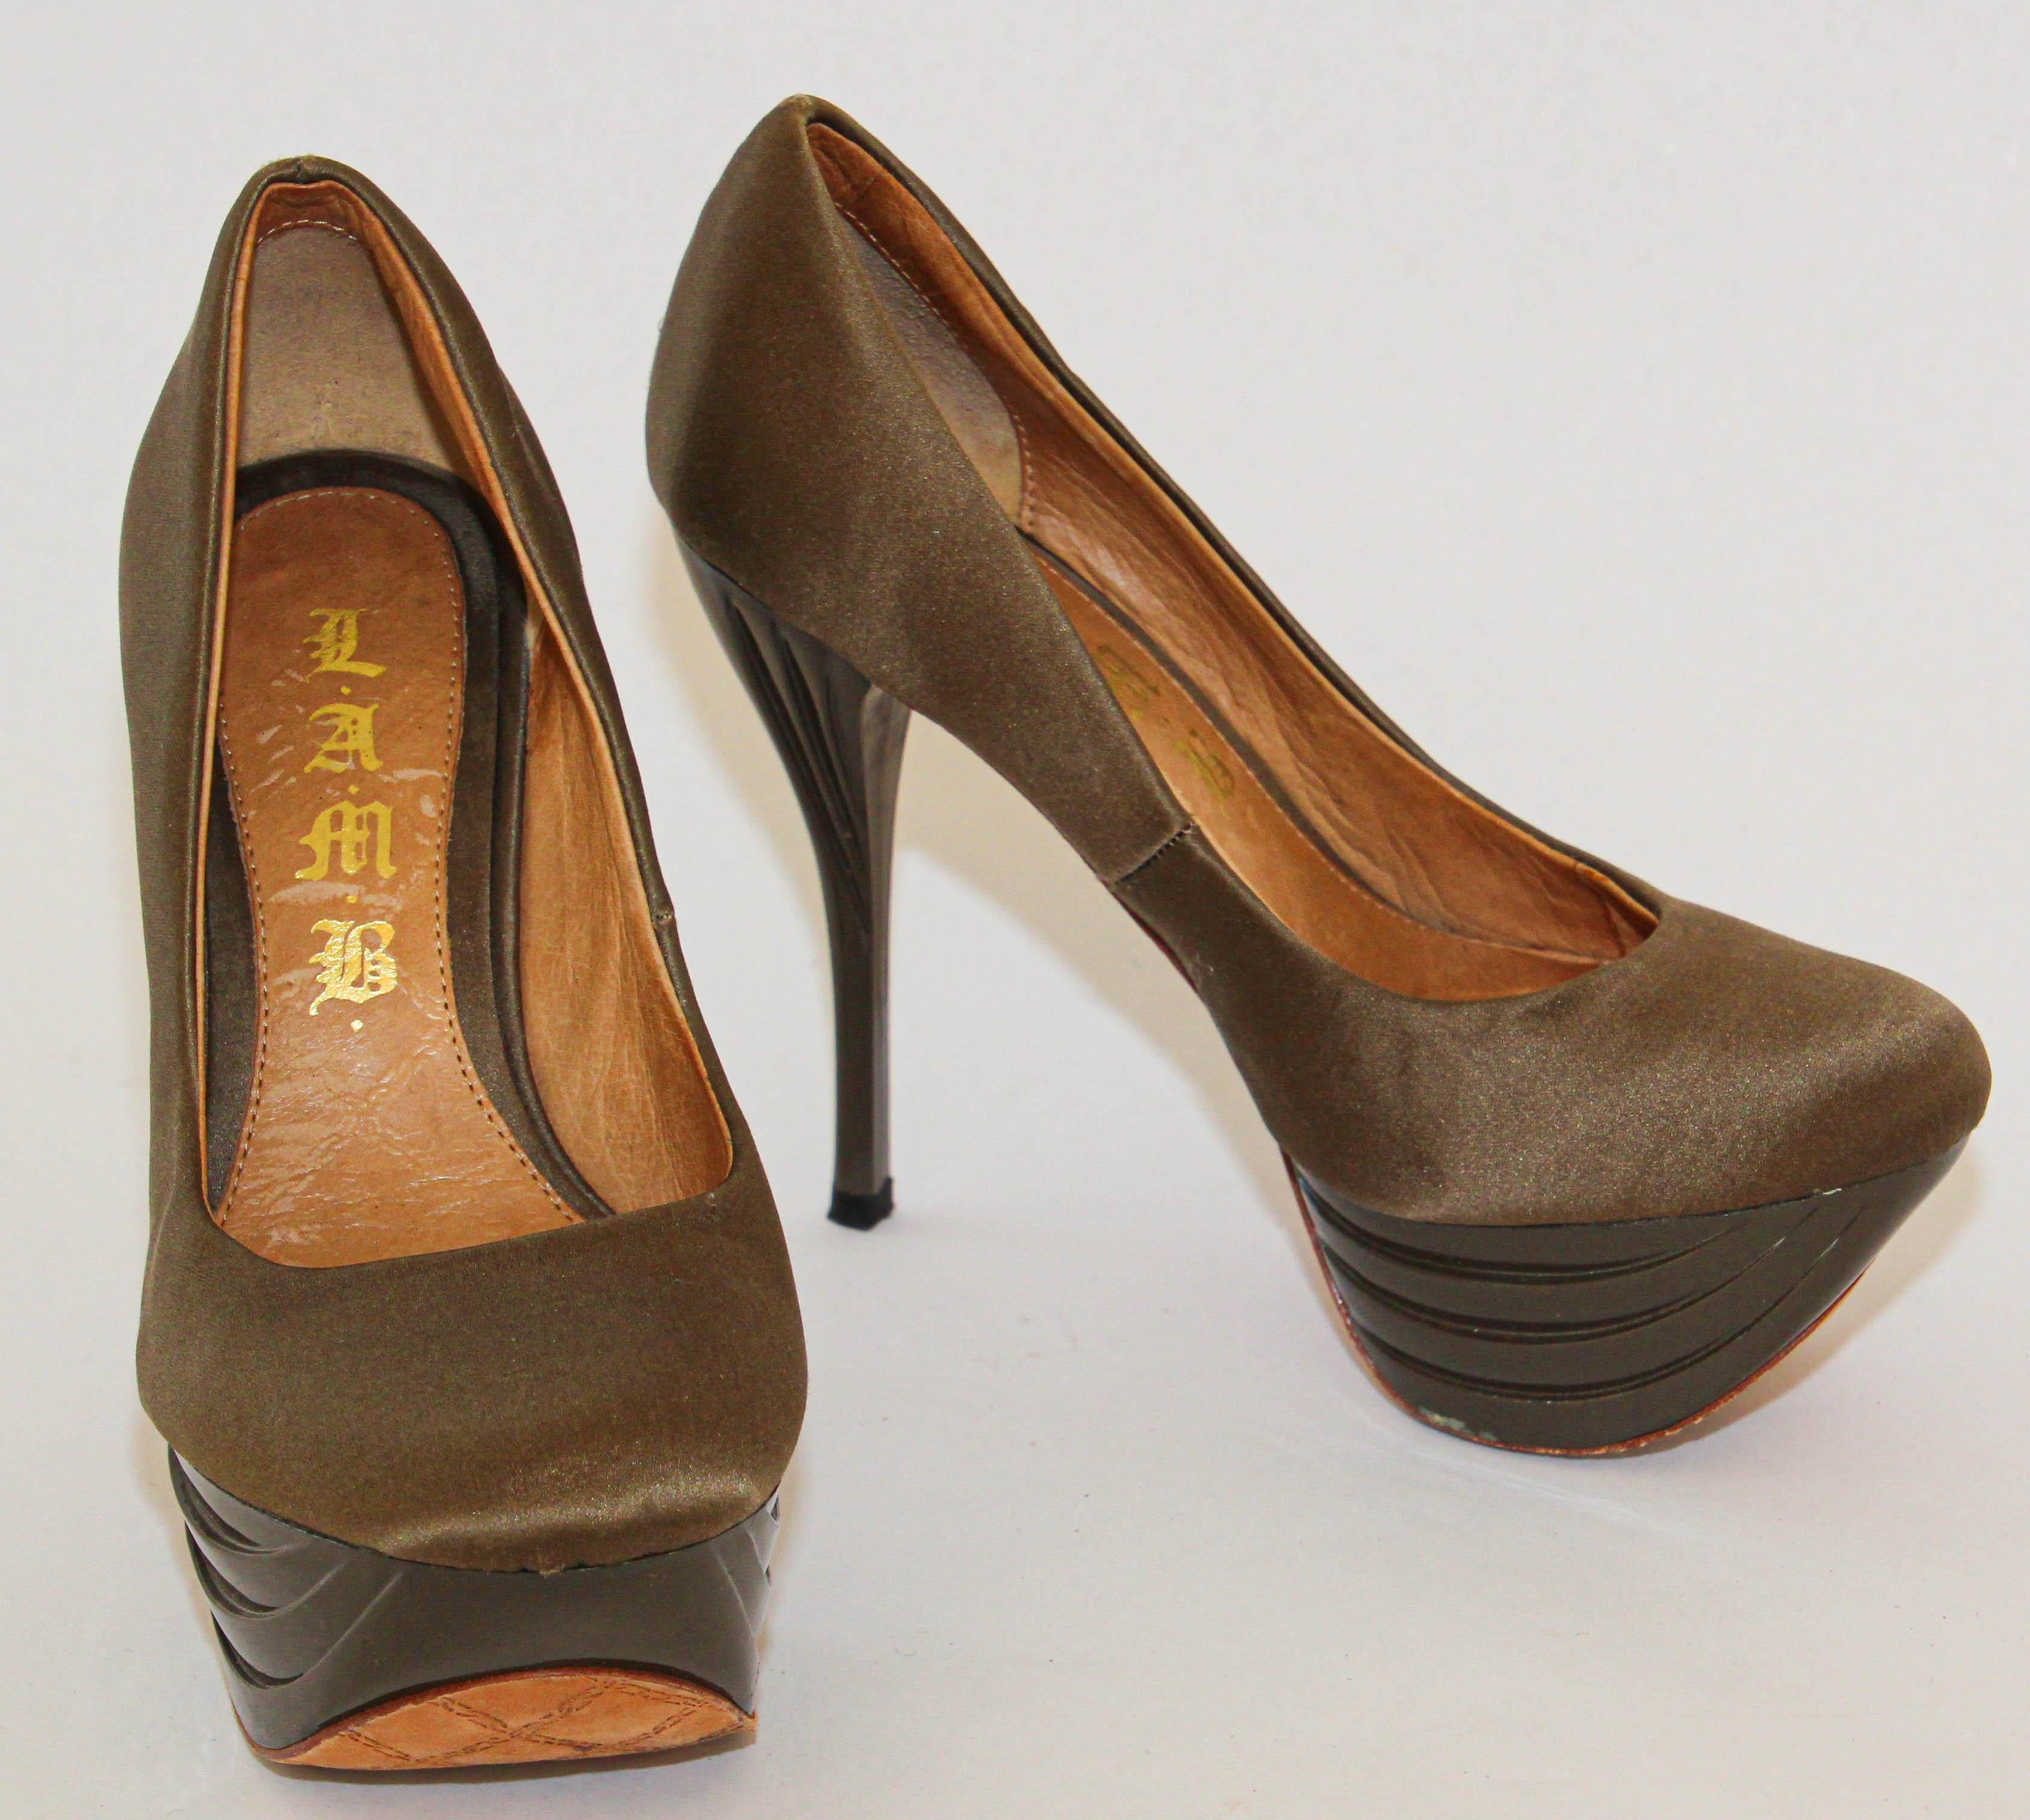 L.A.M.B. LAMB Z-Project Satin and Lacquer Dark Taupe Platform Heels 6 M For Sale 7